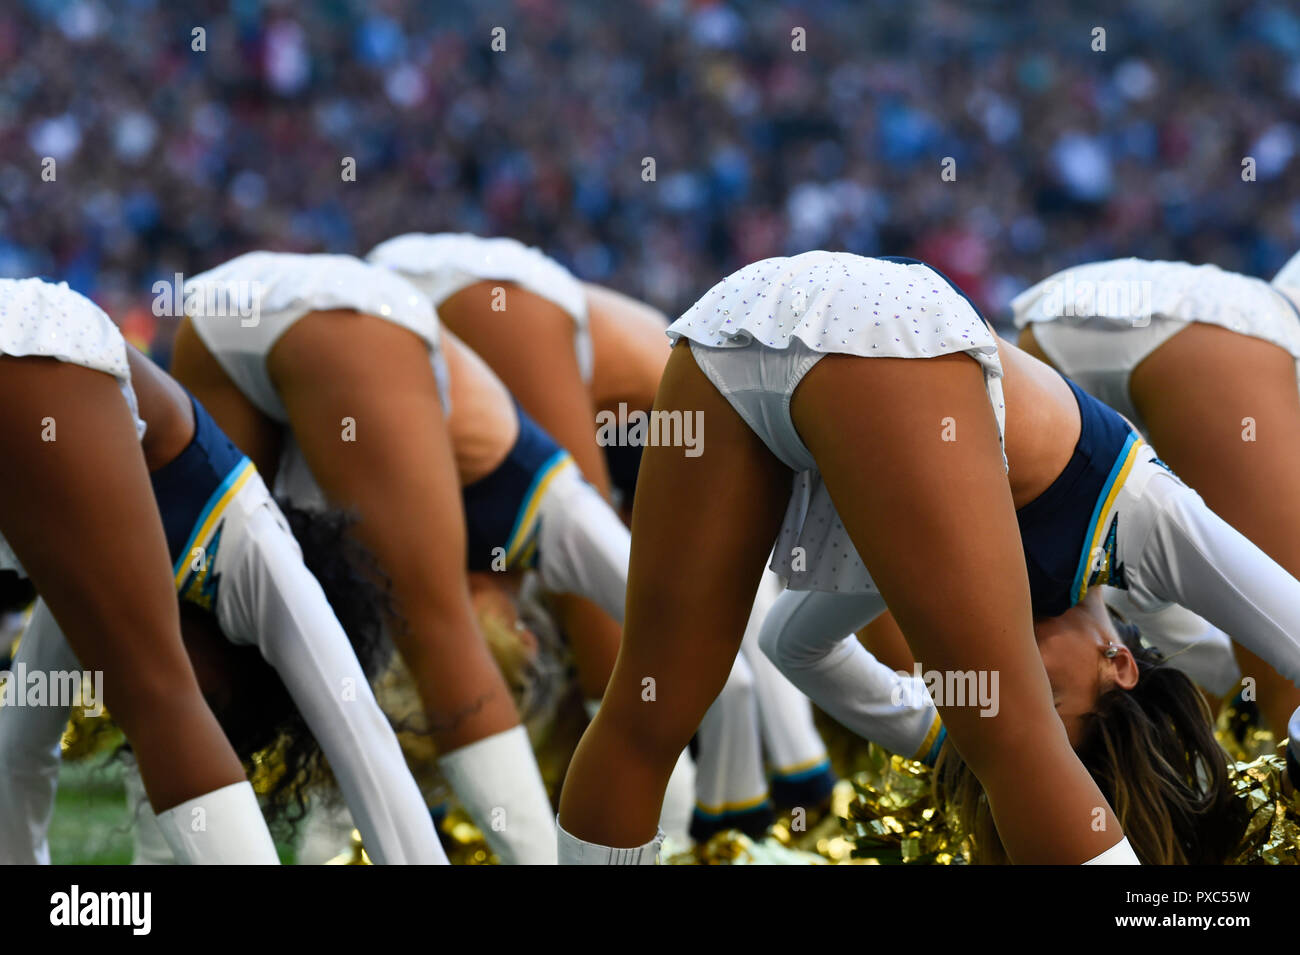 London, UK.  21 October 2018.  Chargers cheerleaders. Tennessee Titans at Los Angeles Chargers NFL game at Wembley Stadium, the second of the NFL London 2018 games. Final score - Chargers 20 Titans 19.  Credit: Stephen Chung / Alamy Live News Stock Photo